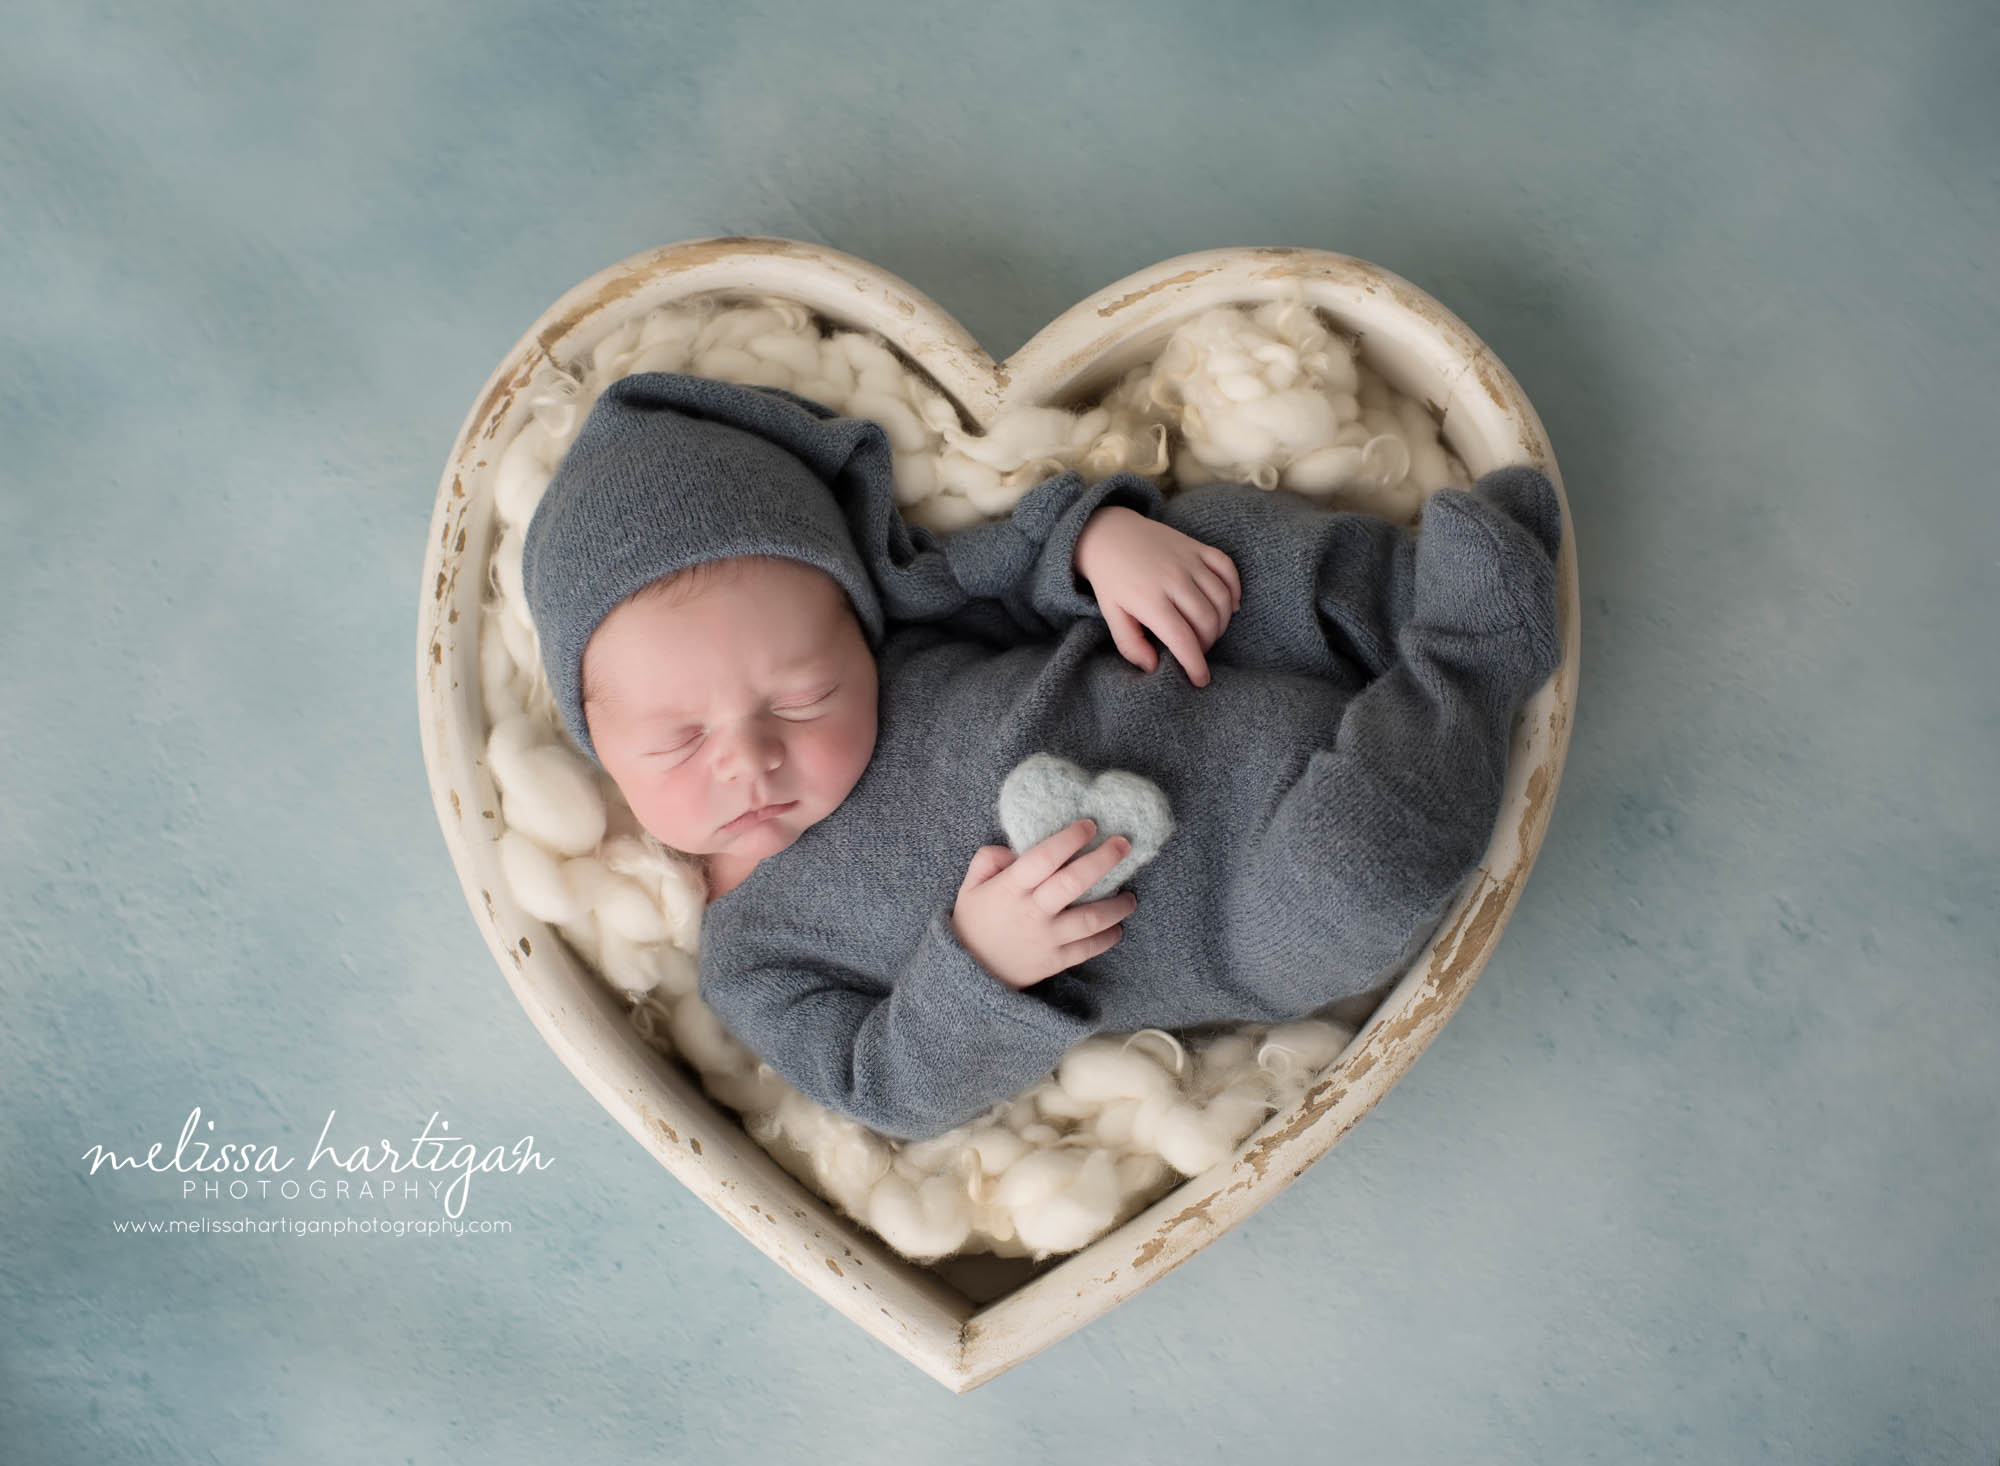 newborn baby boy posed in cream wooden heart prop wearing blue gray outfit and sleepy cap